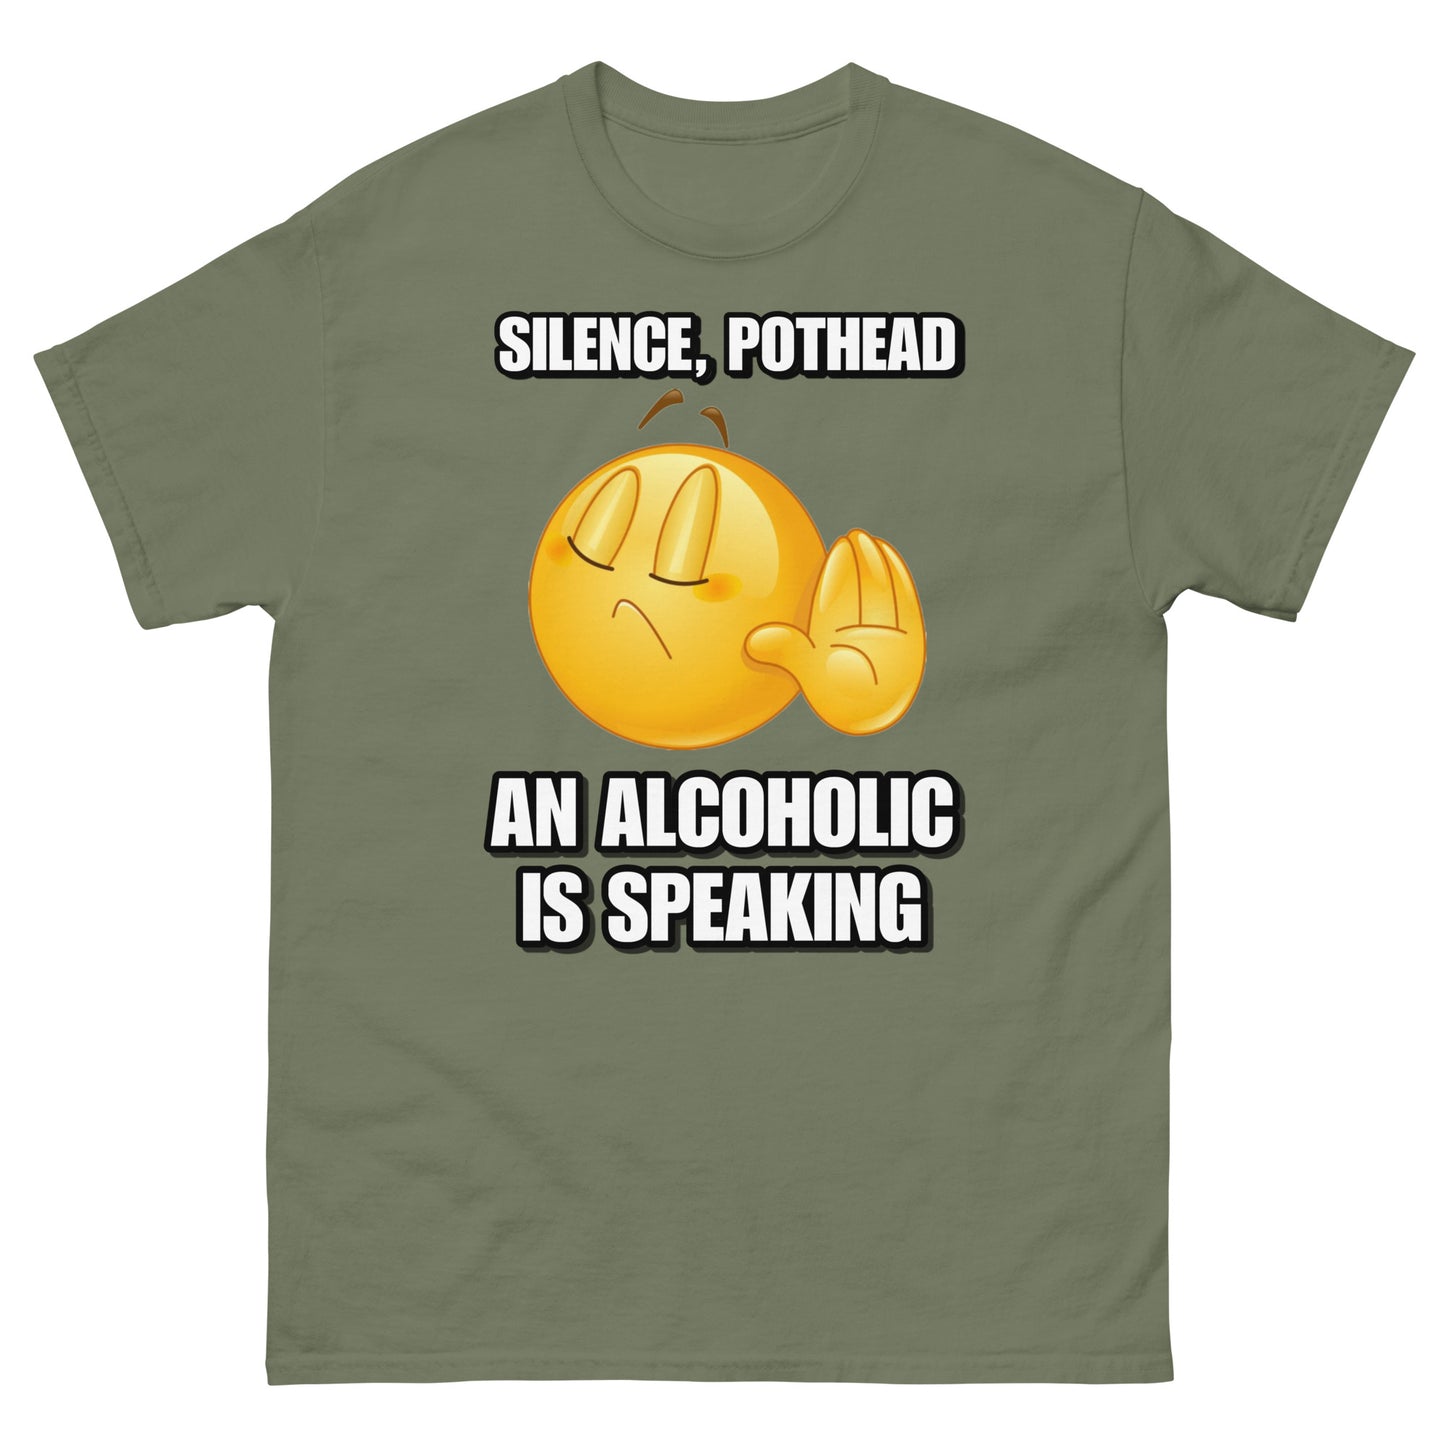 Silence Pothead, an Alcoholic is speaking Cringey Tee